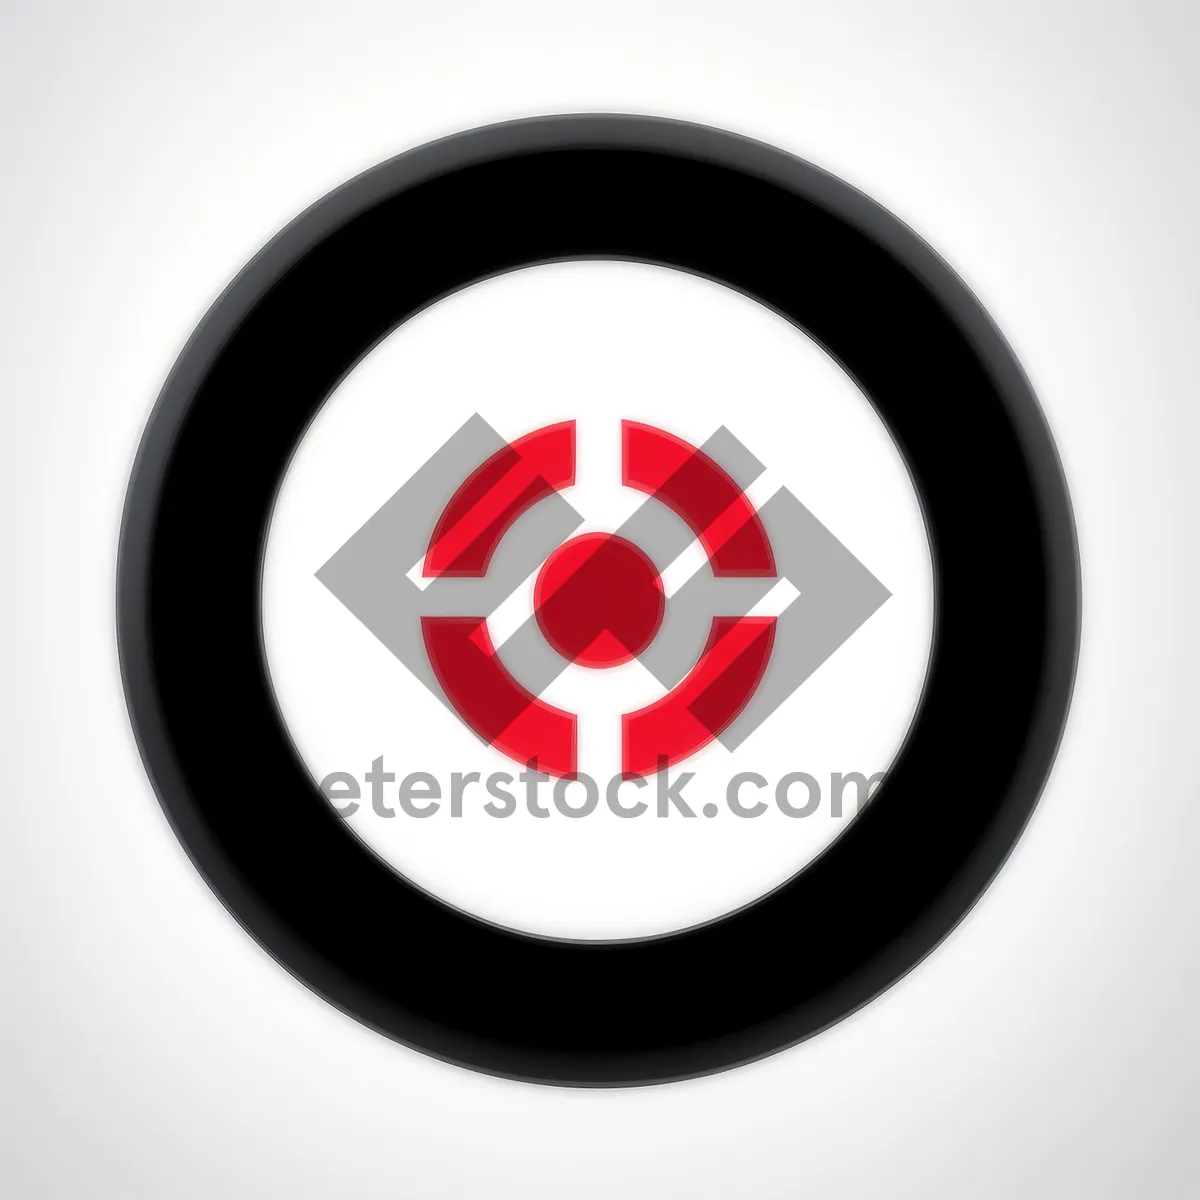 Picture of Shiny Web Button Set: Metallic 3D Circle Icons